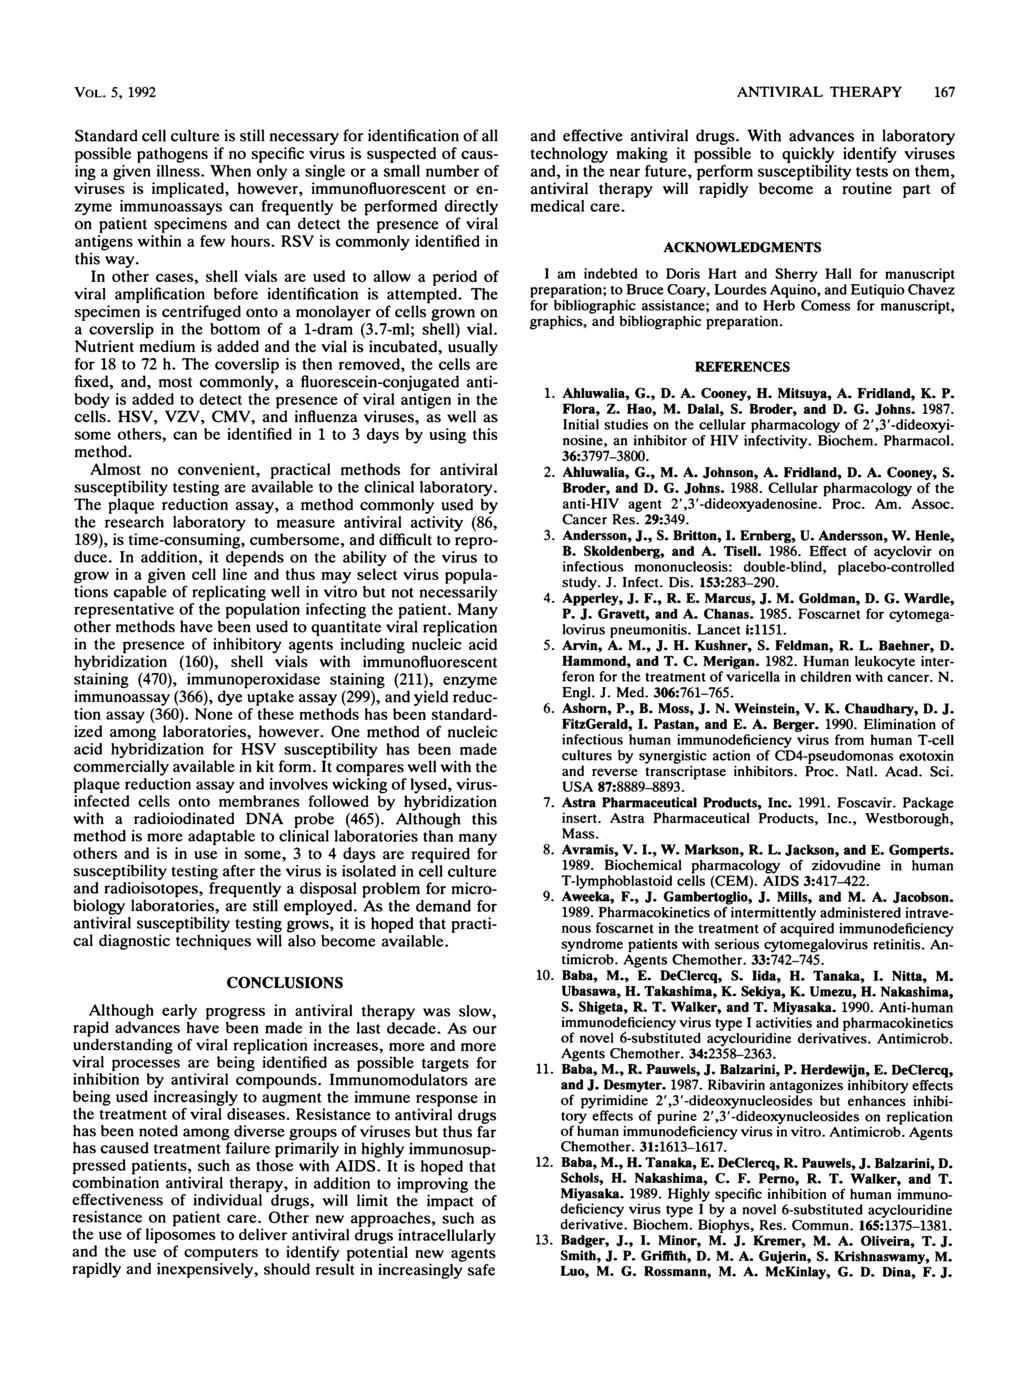 VOL. 5, 1992 Standard cell culture is still necessary for identification of all possible pathogens if no specific virus is suspected of causing a given illness.